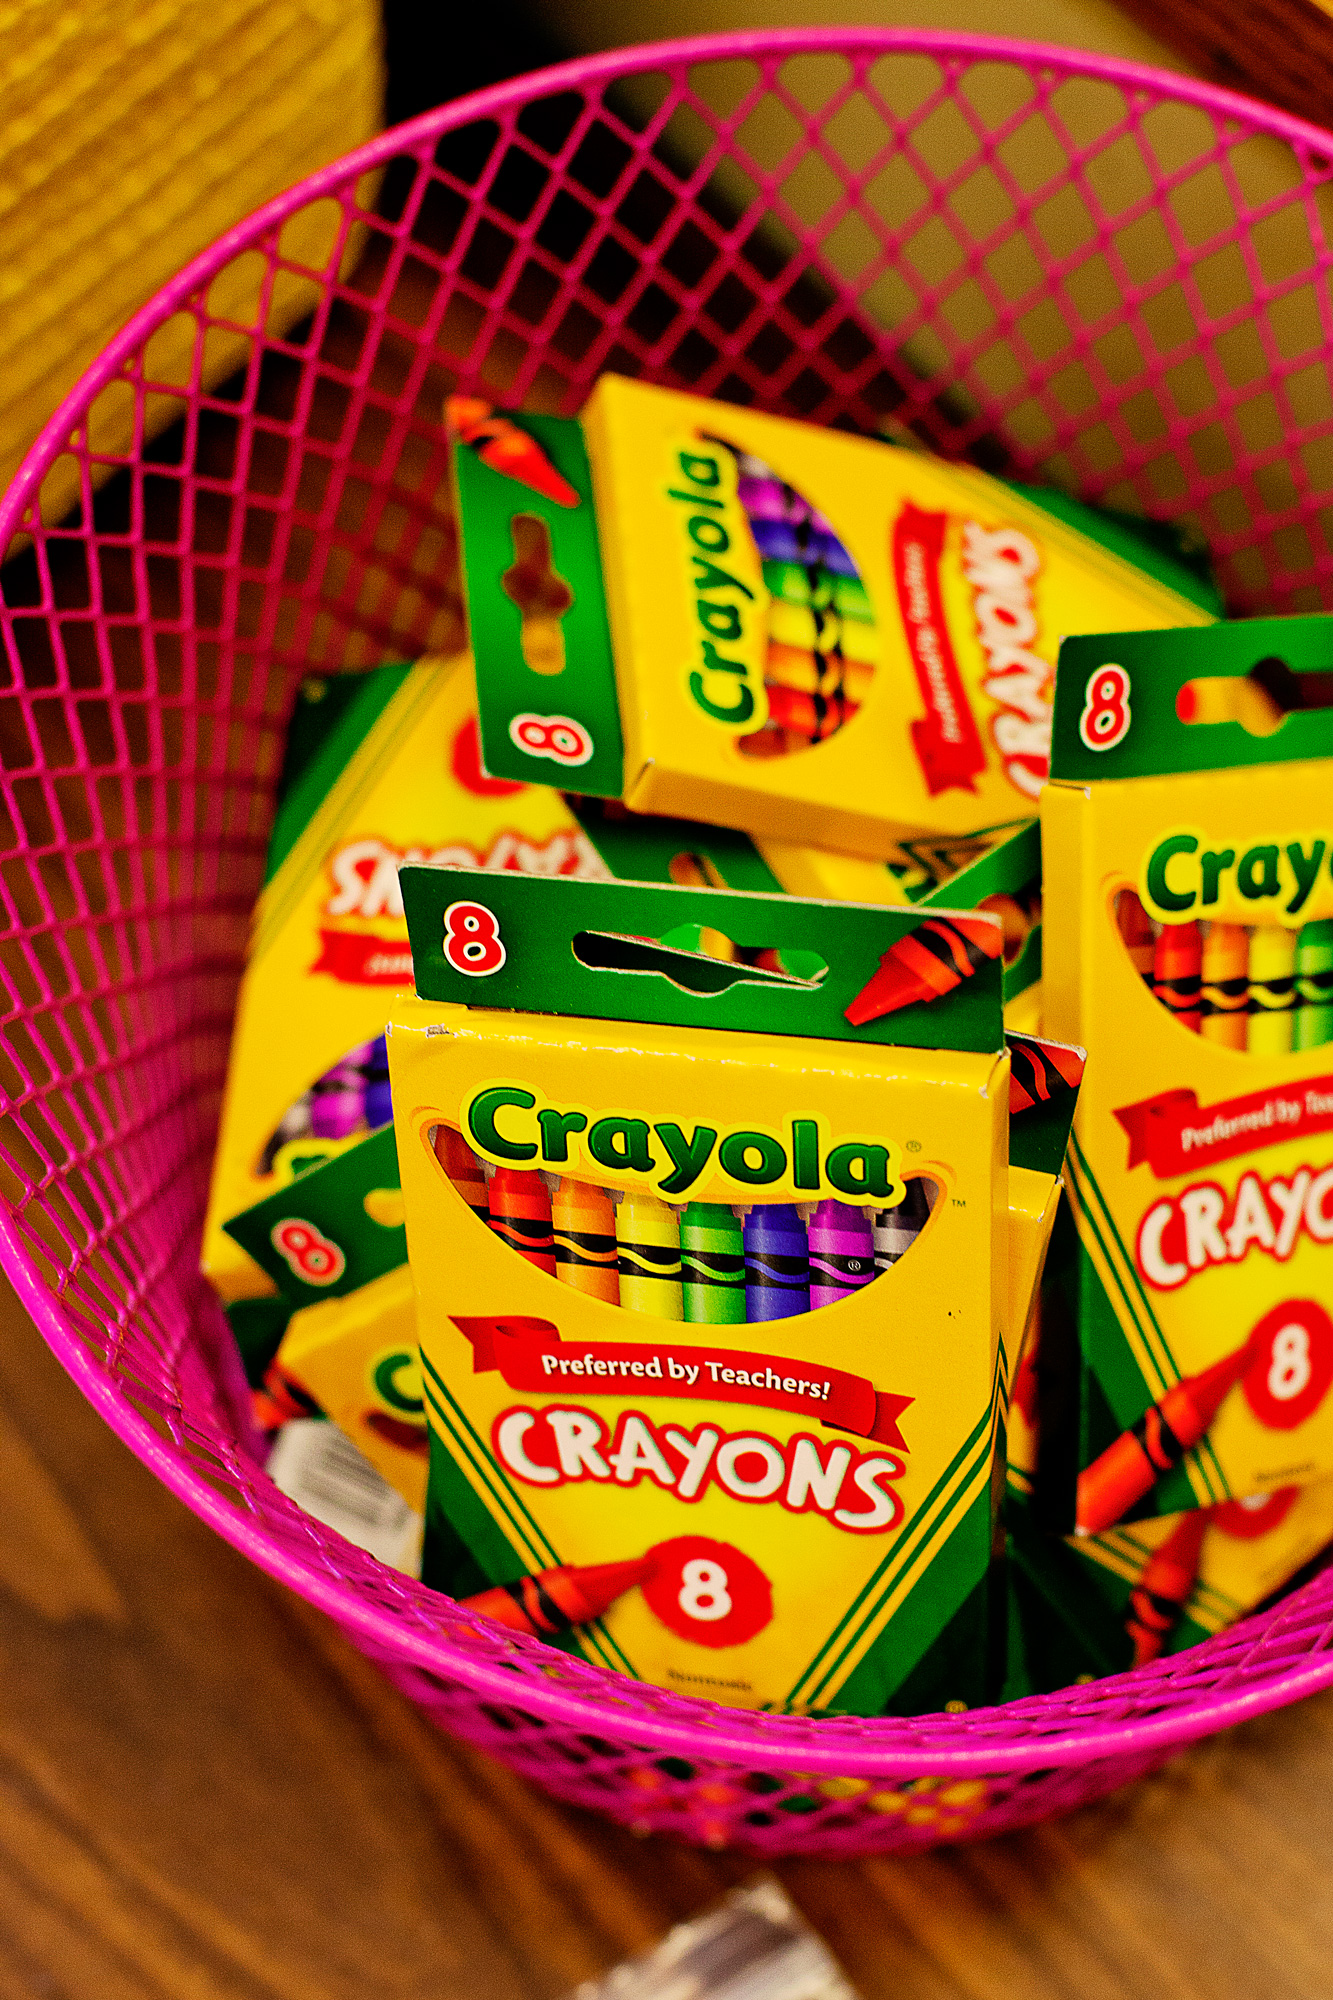 The last year of elementary school - last year of crayons on the supply list?